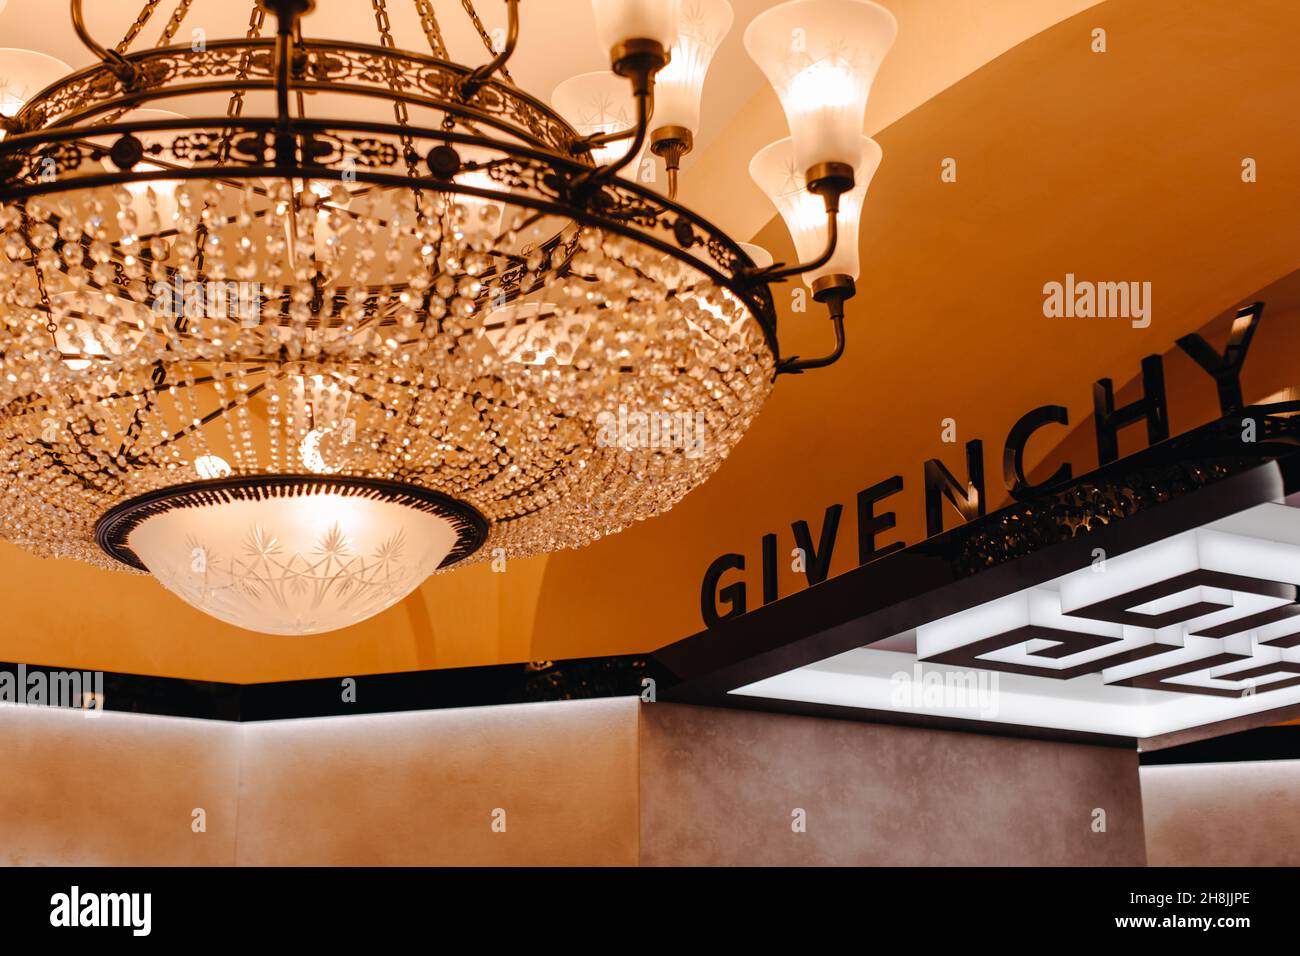 Givenchy luxury store. French fashion and perfume house, hosting the brand of haute couture clothing, accessories, cosmetic. Golden light of royal cry Stock Photo